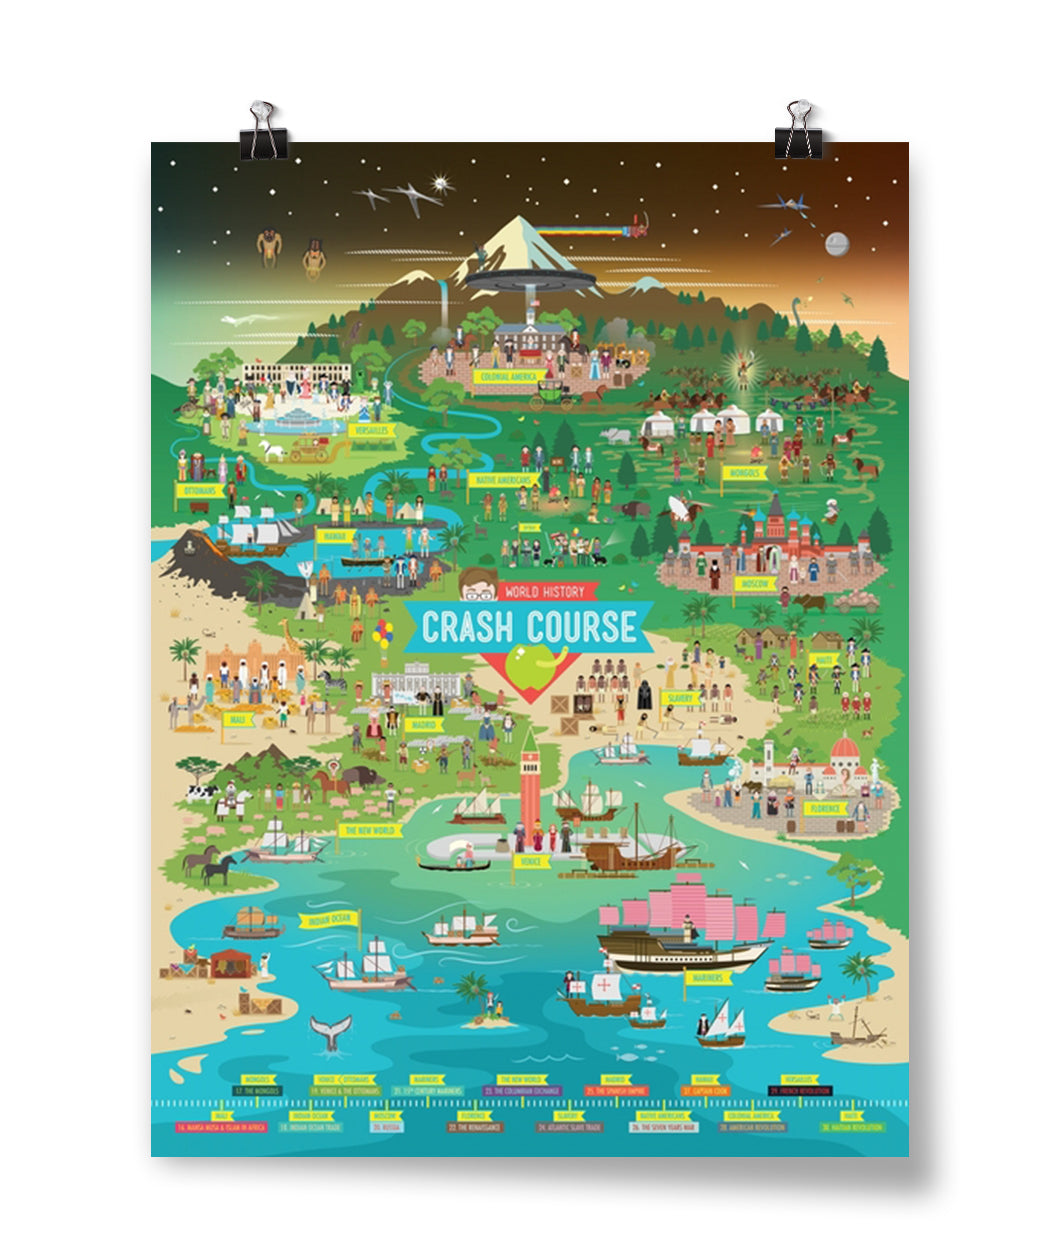 Drawing of a landscapre from mountains to sea filled with groups of people and landmarks. There is a timeline at the bottom of the poster. By CrashCourse